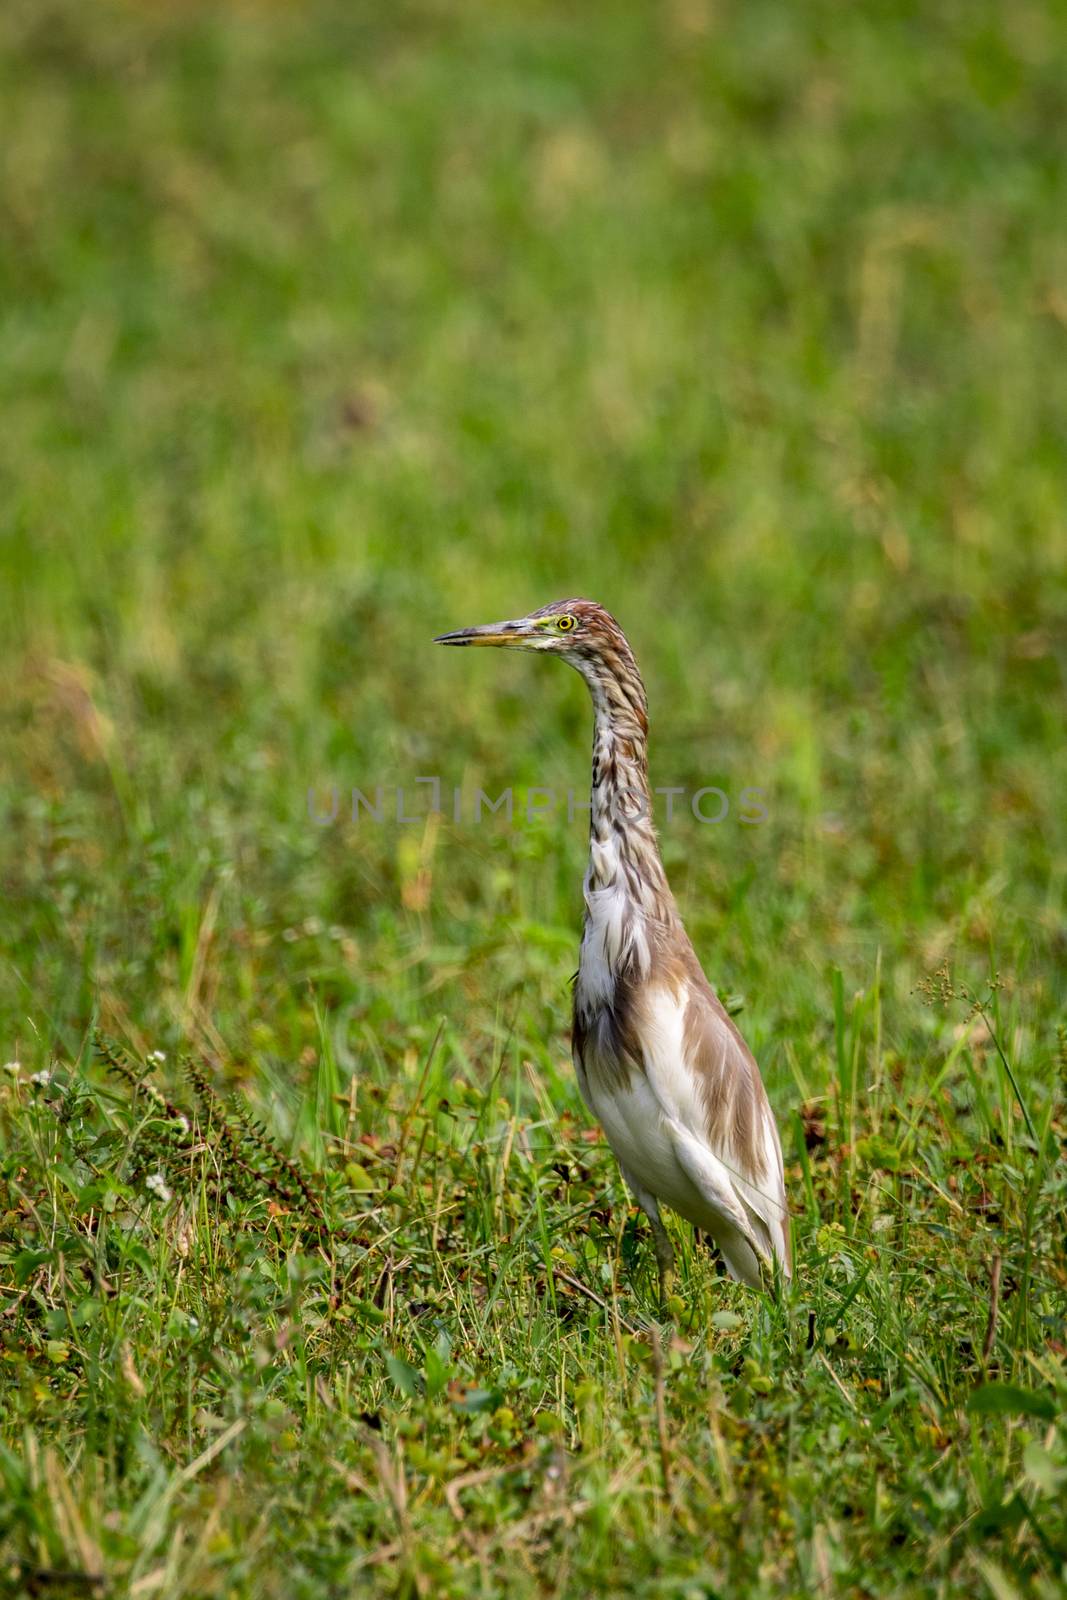 Image of Chinese Pond Heron (Ardeola bacchus) on green grass field. Bird